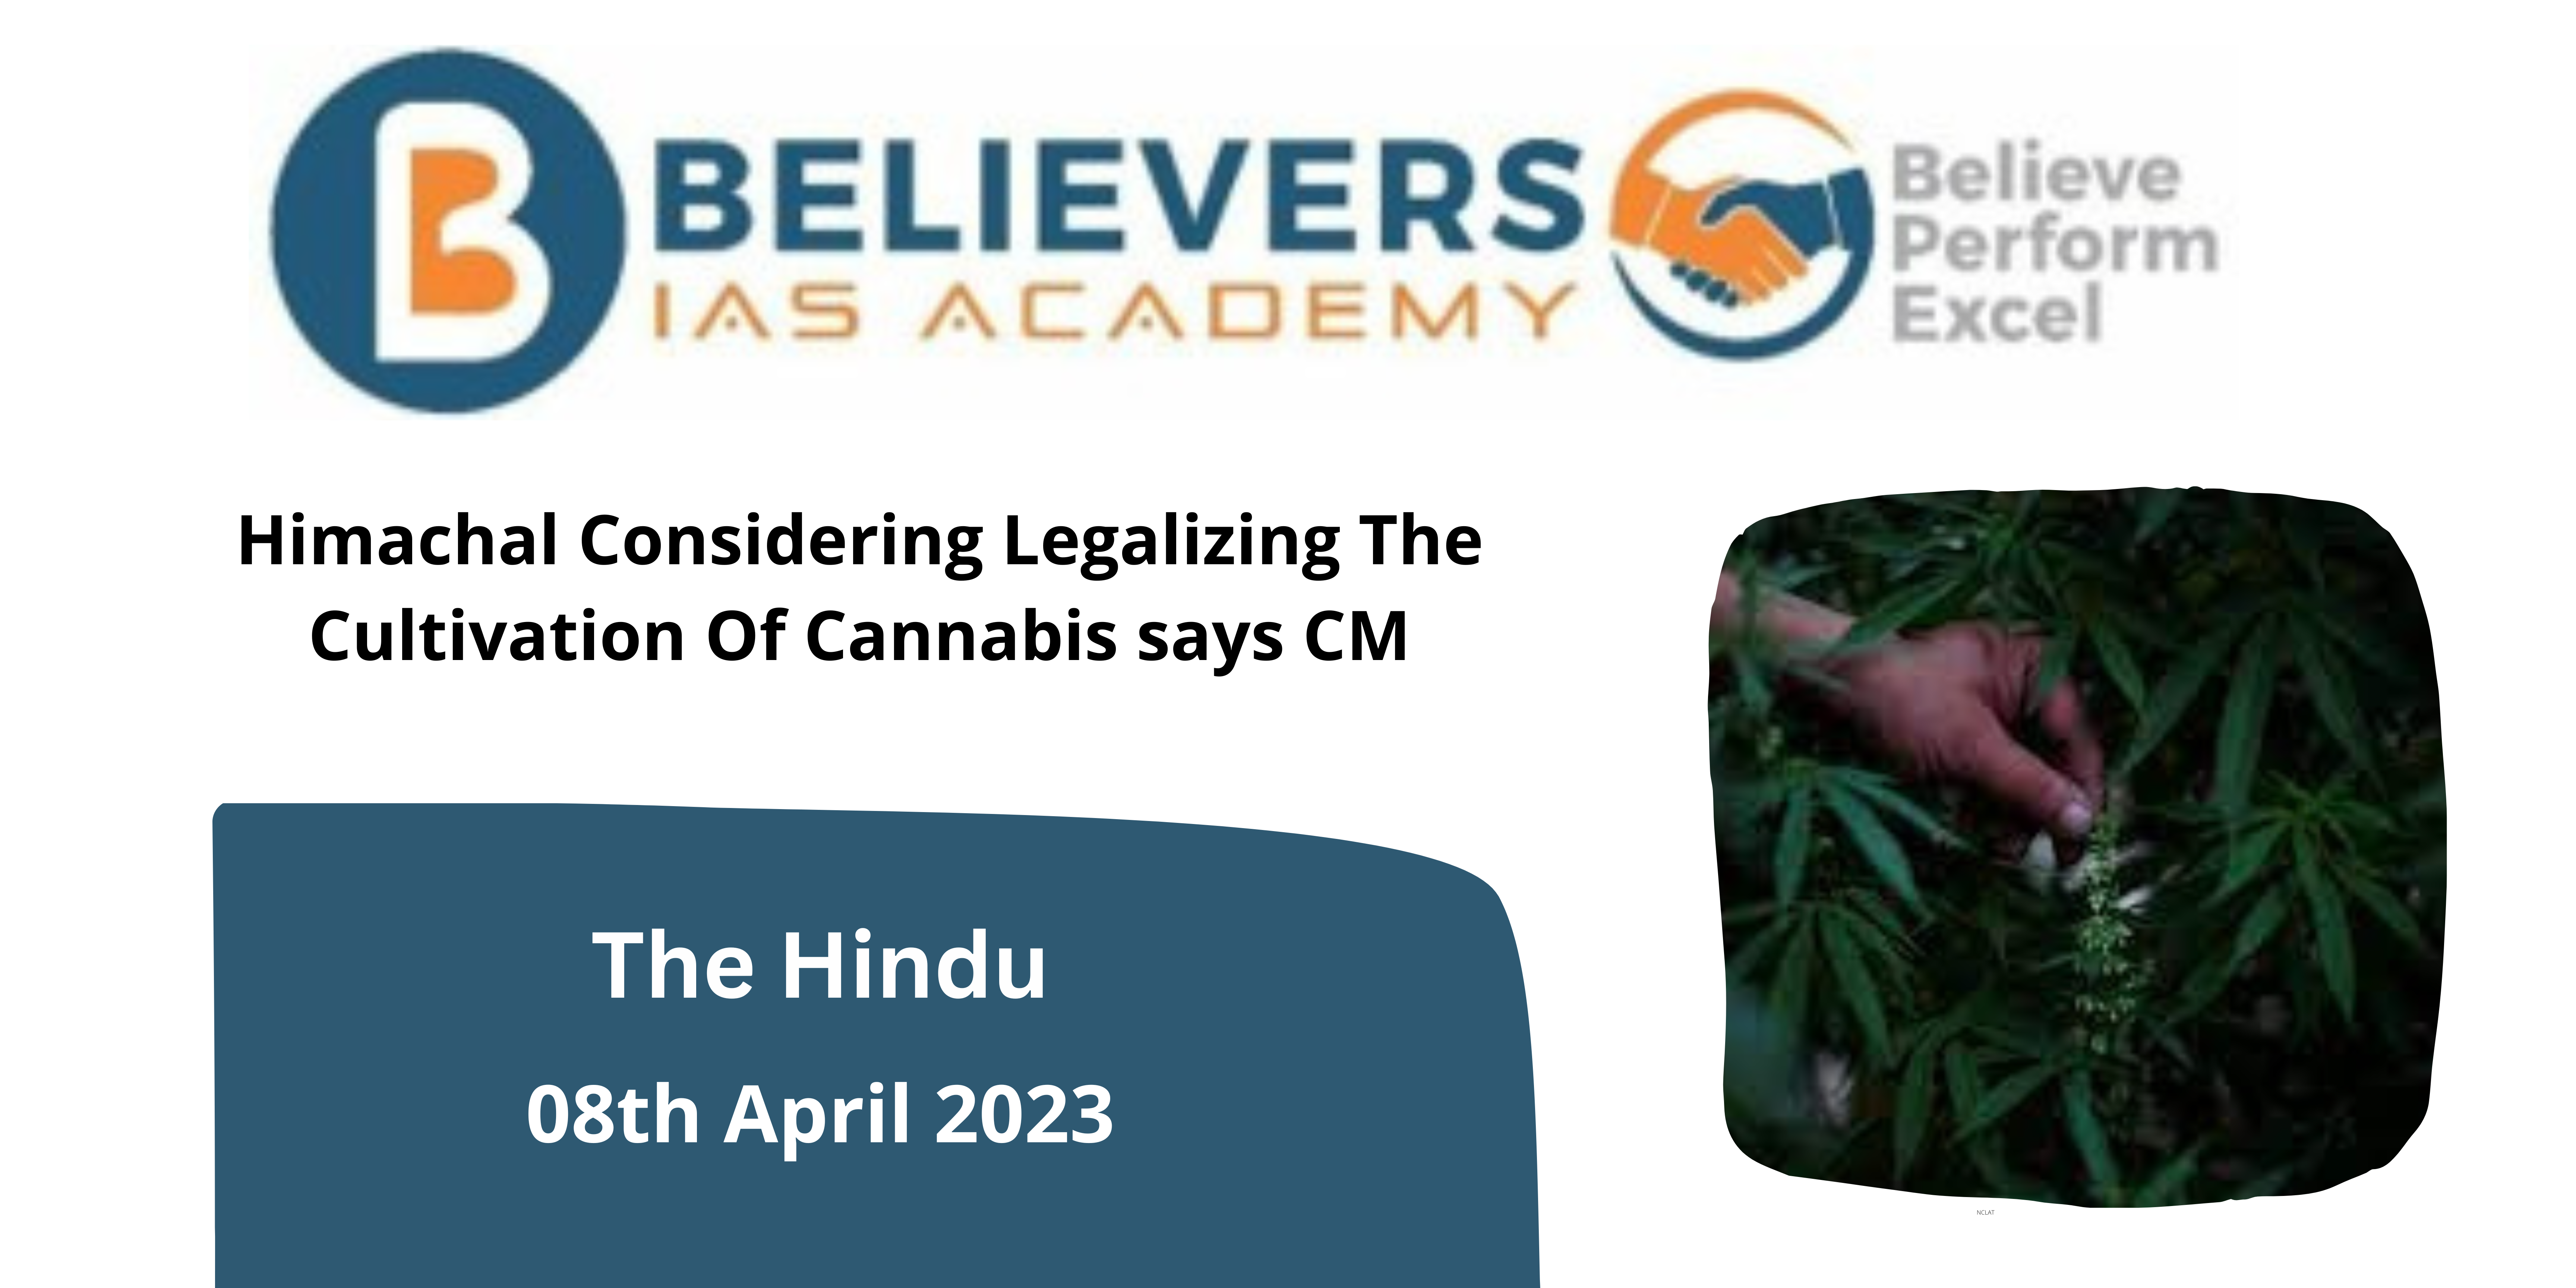 Himachal Considering Legalizing The Cultivation Of Cannabis says CM